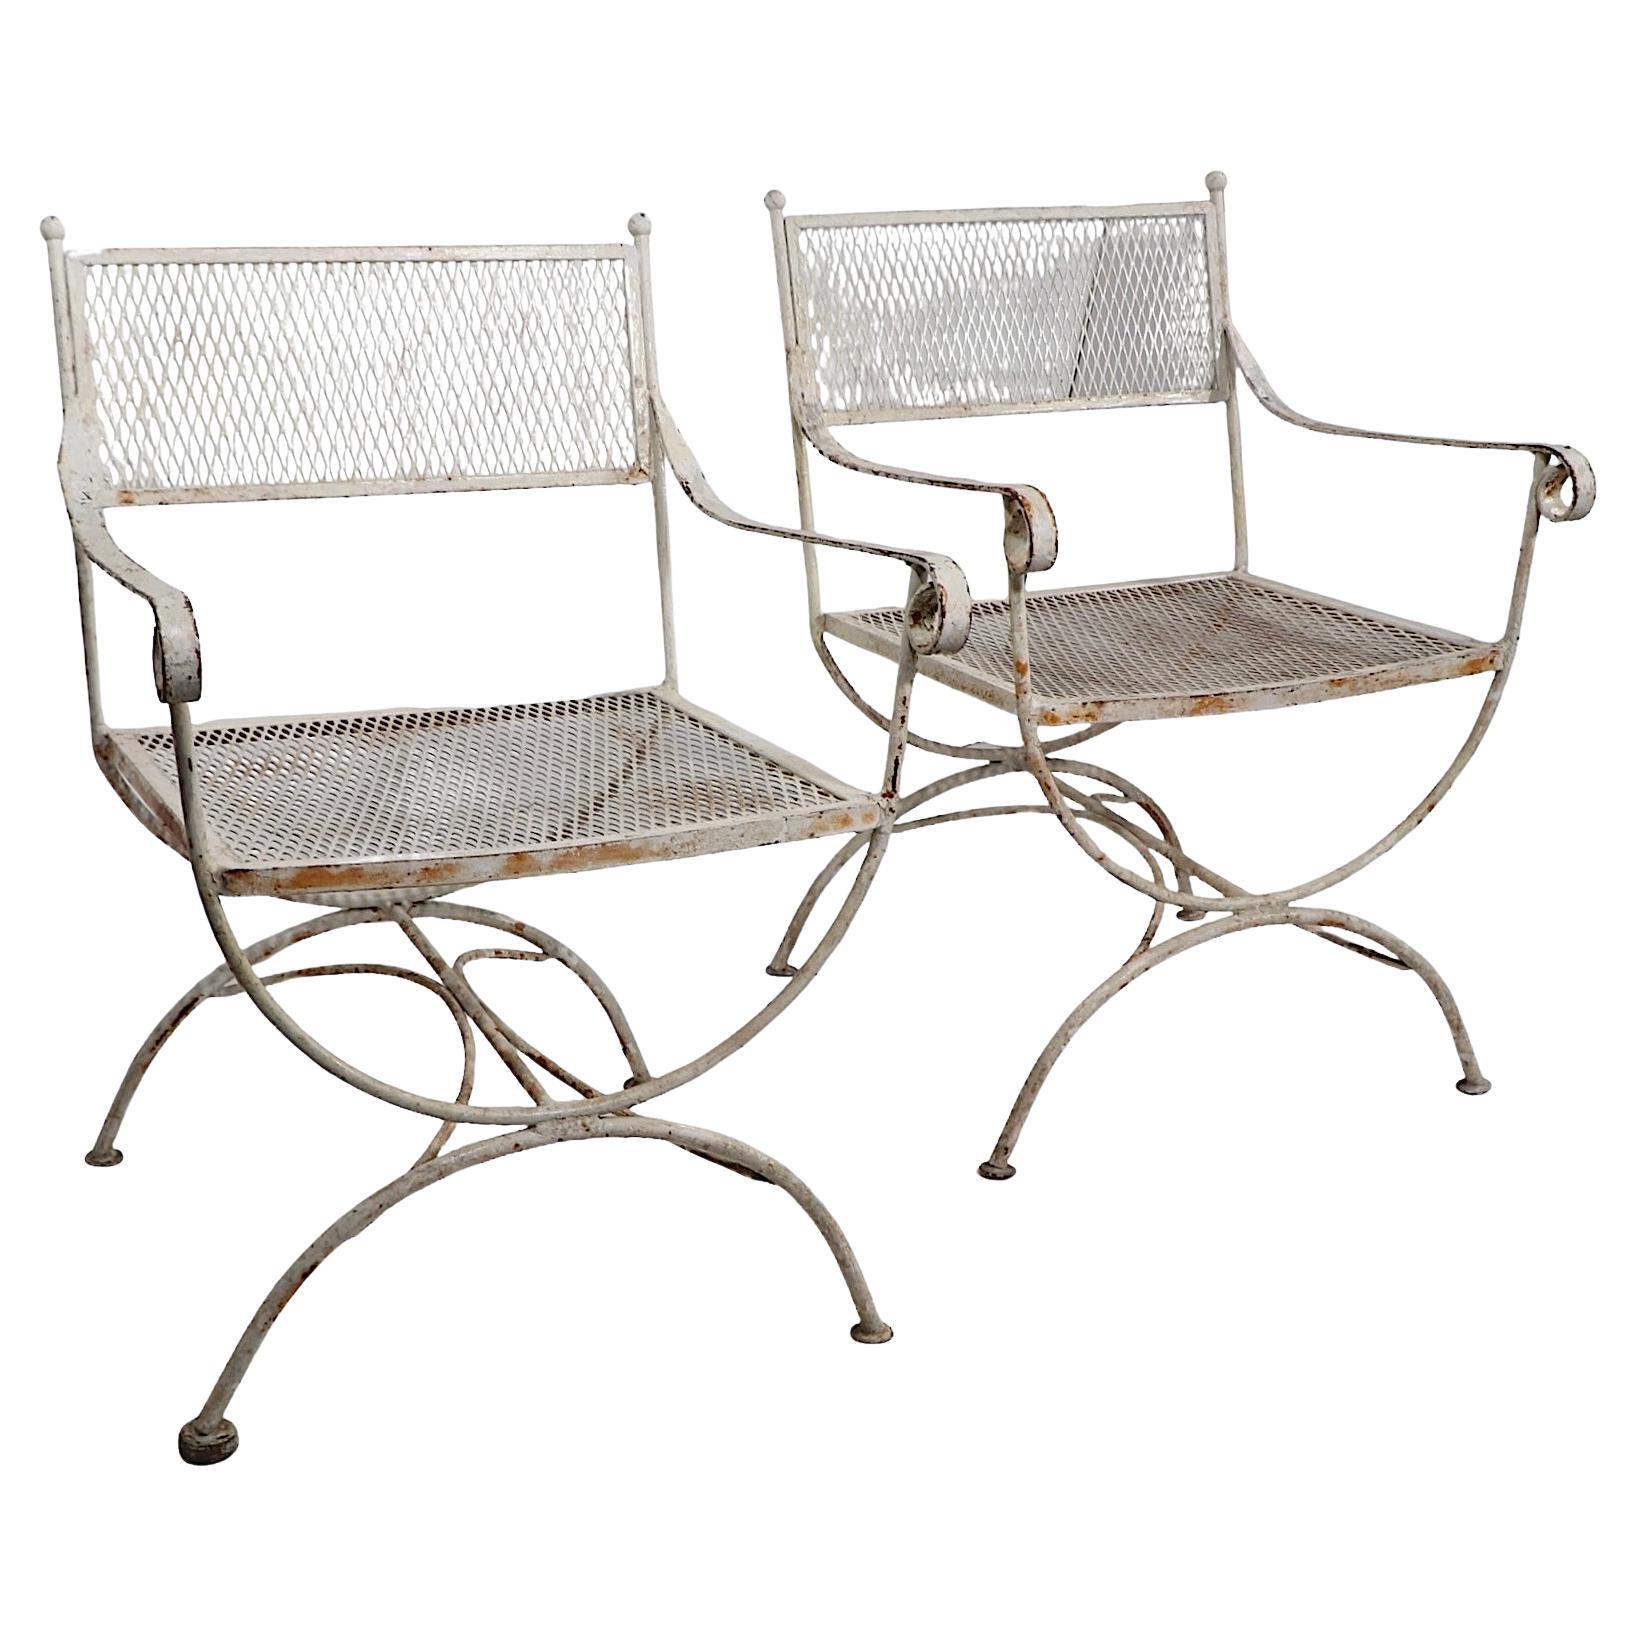 Pr.  Wrought Iron Neo Classical Hollywood Regency Style Garden Chairs 